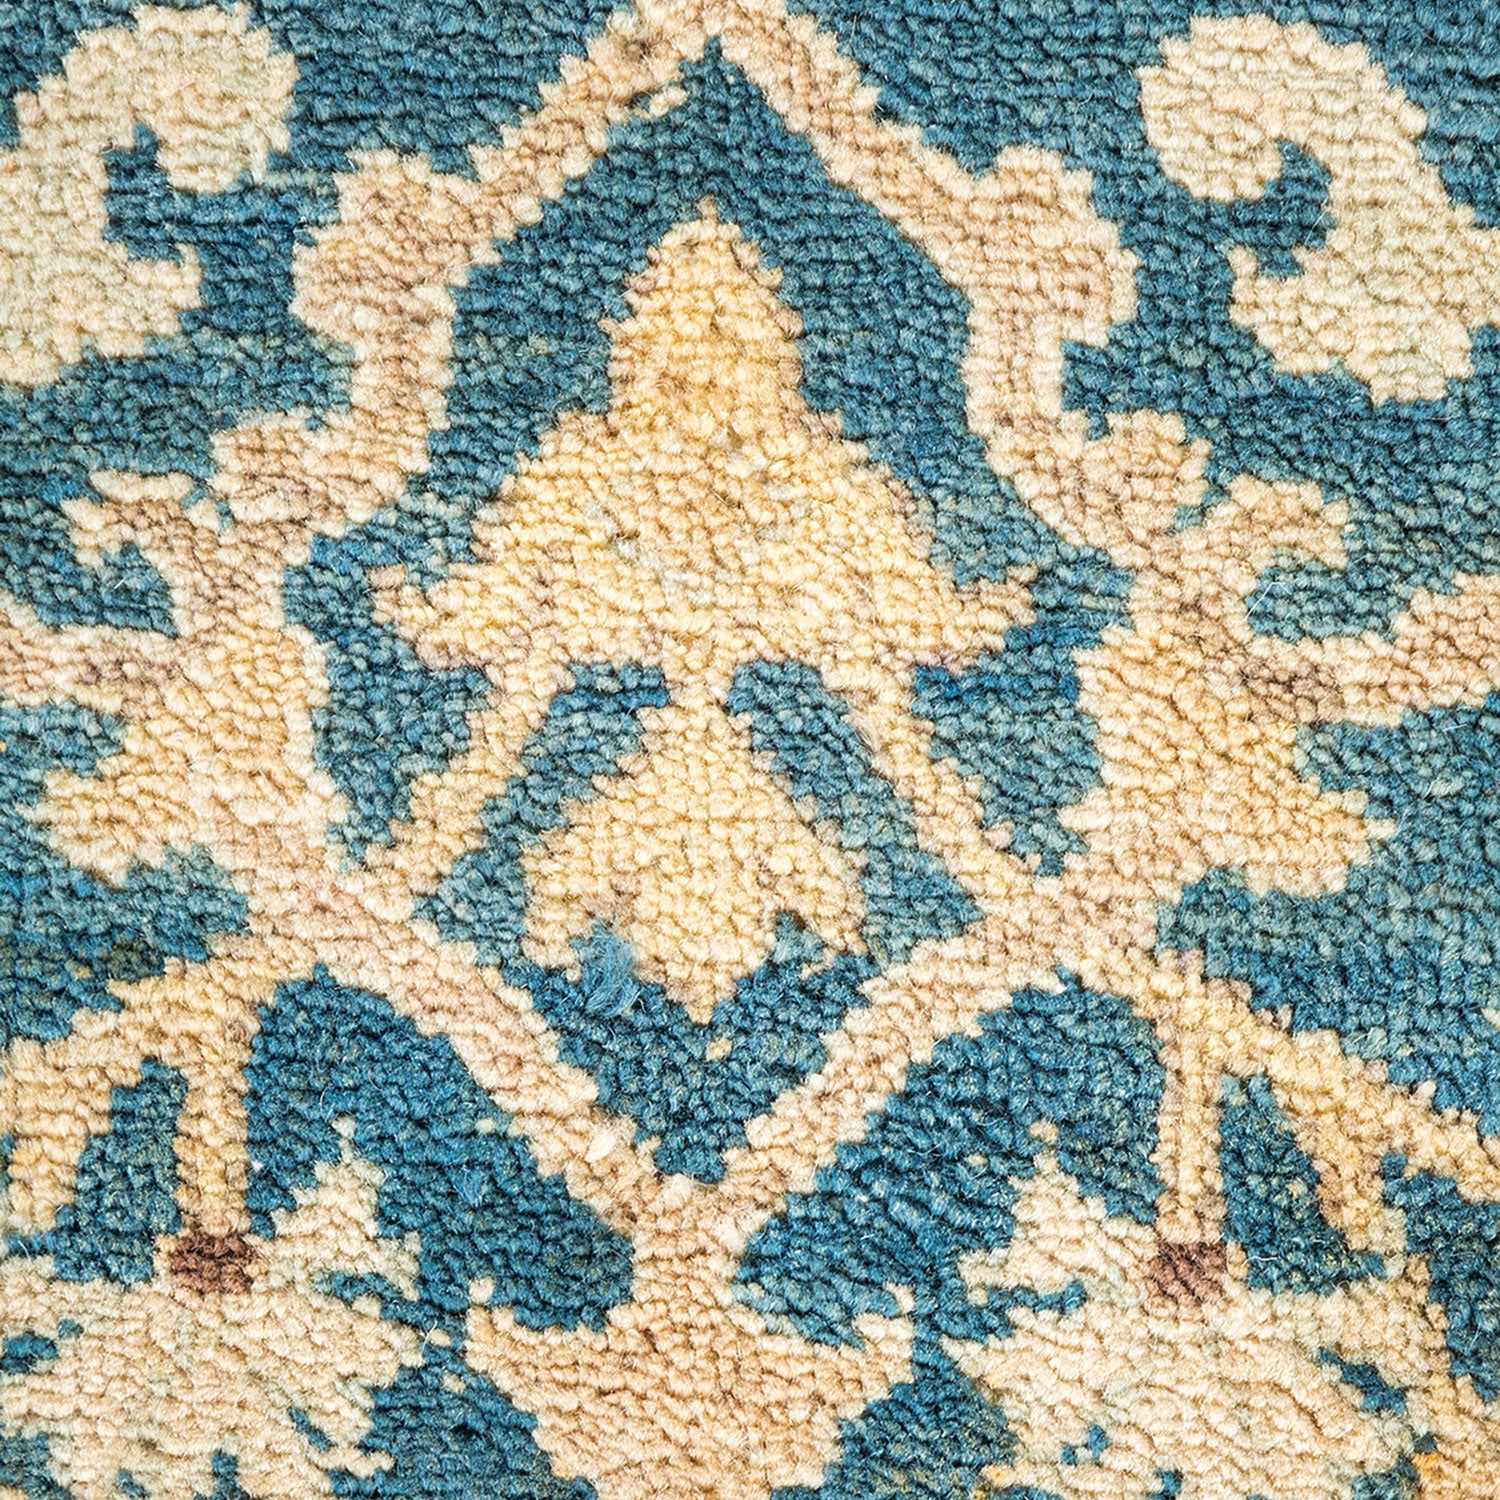 Close-up of a traditional Middle Eastern-inspired rug with wear